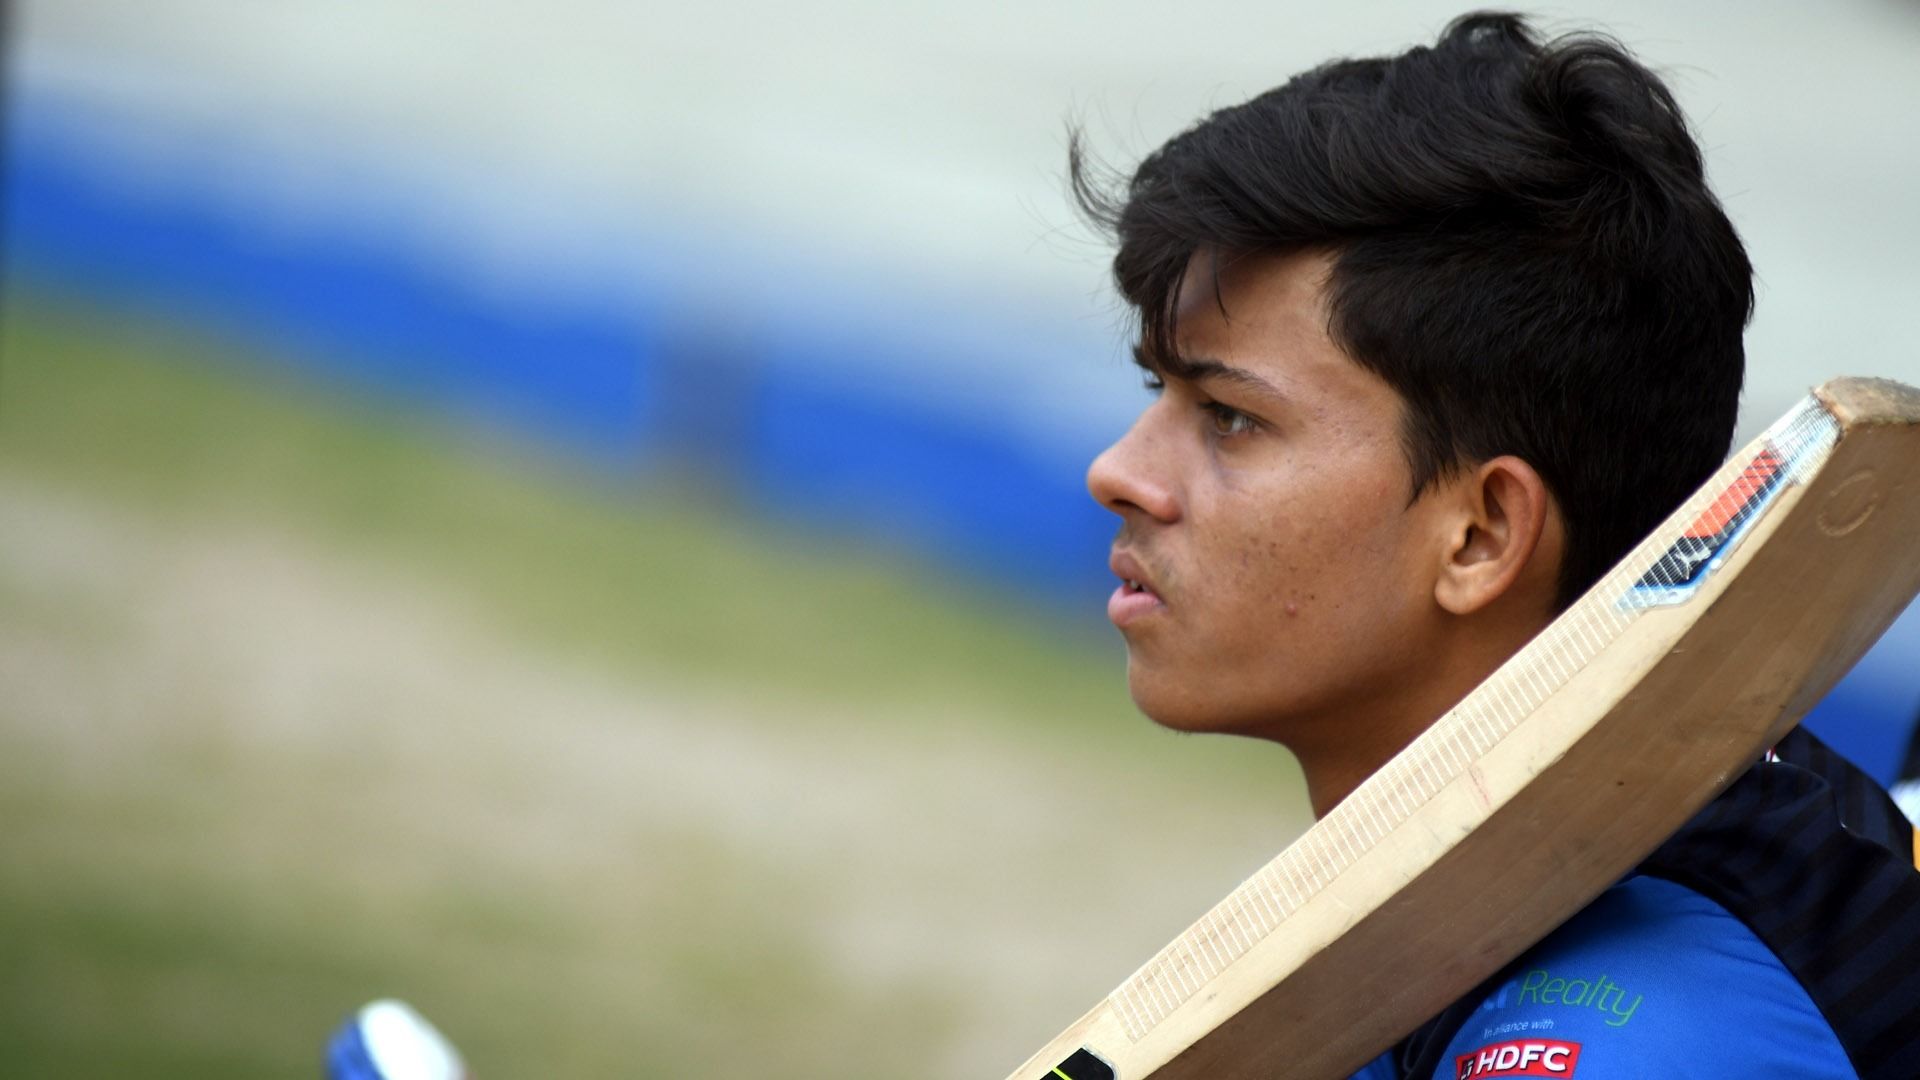 Yashasvi now among IPL's top 5 youngest centurions | Times of India